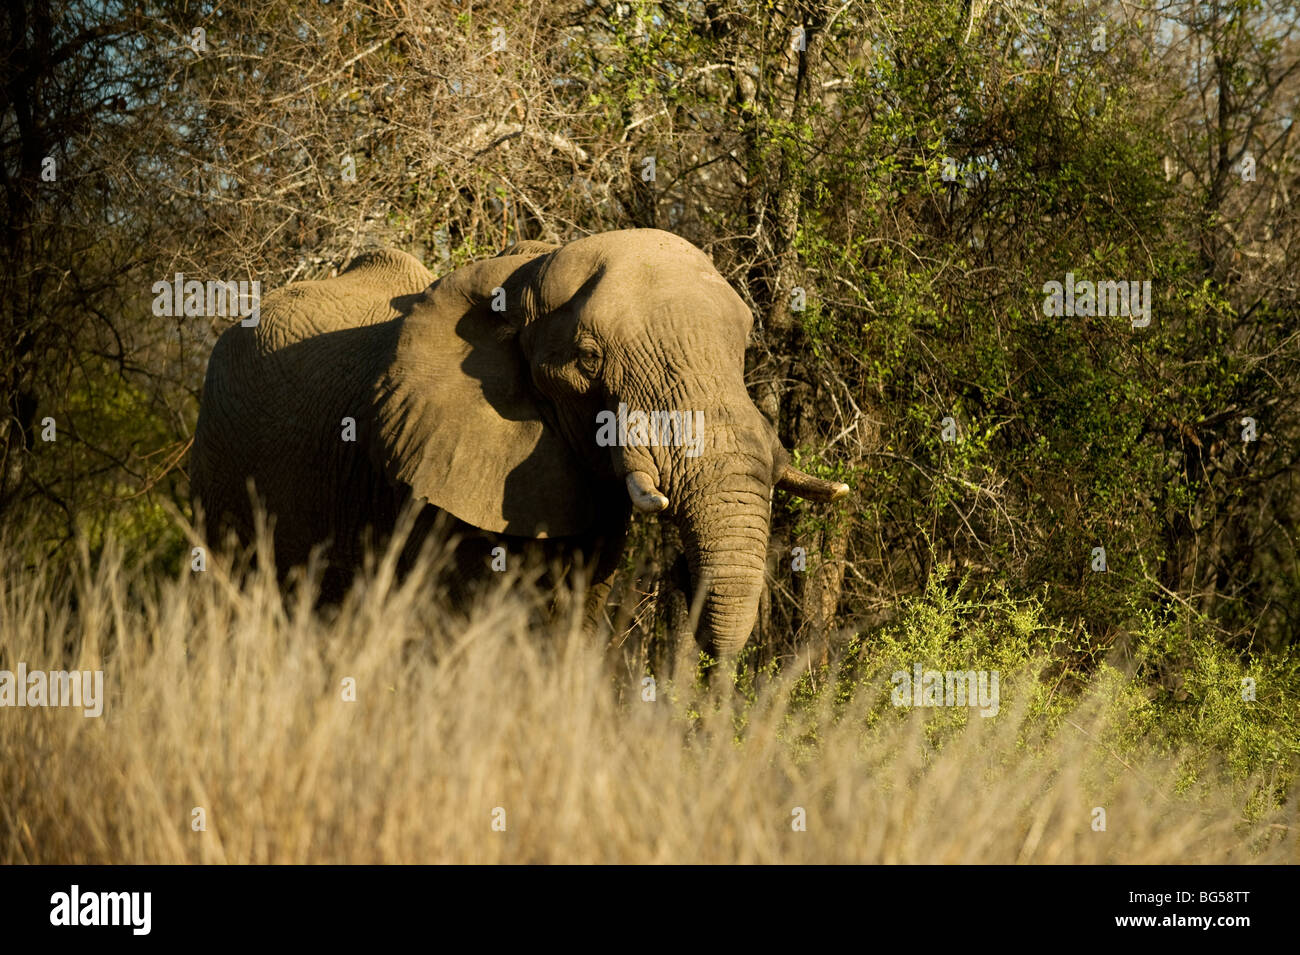 African Elephant. Kruger National Park. South Africa Stock Photo